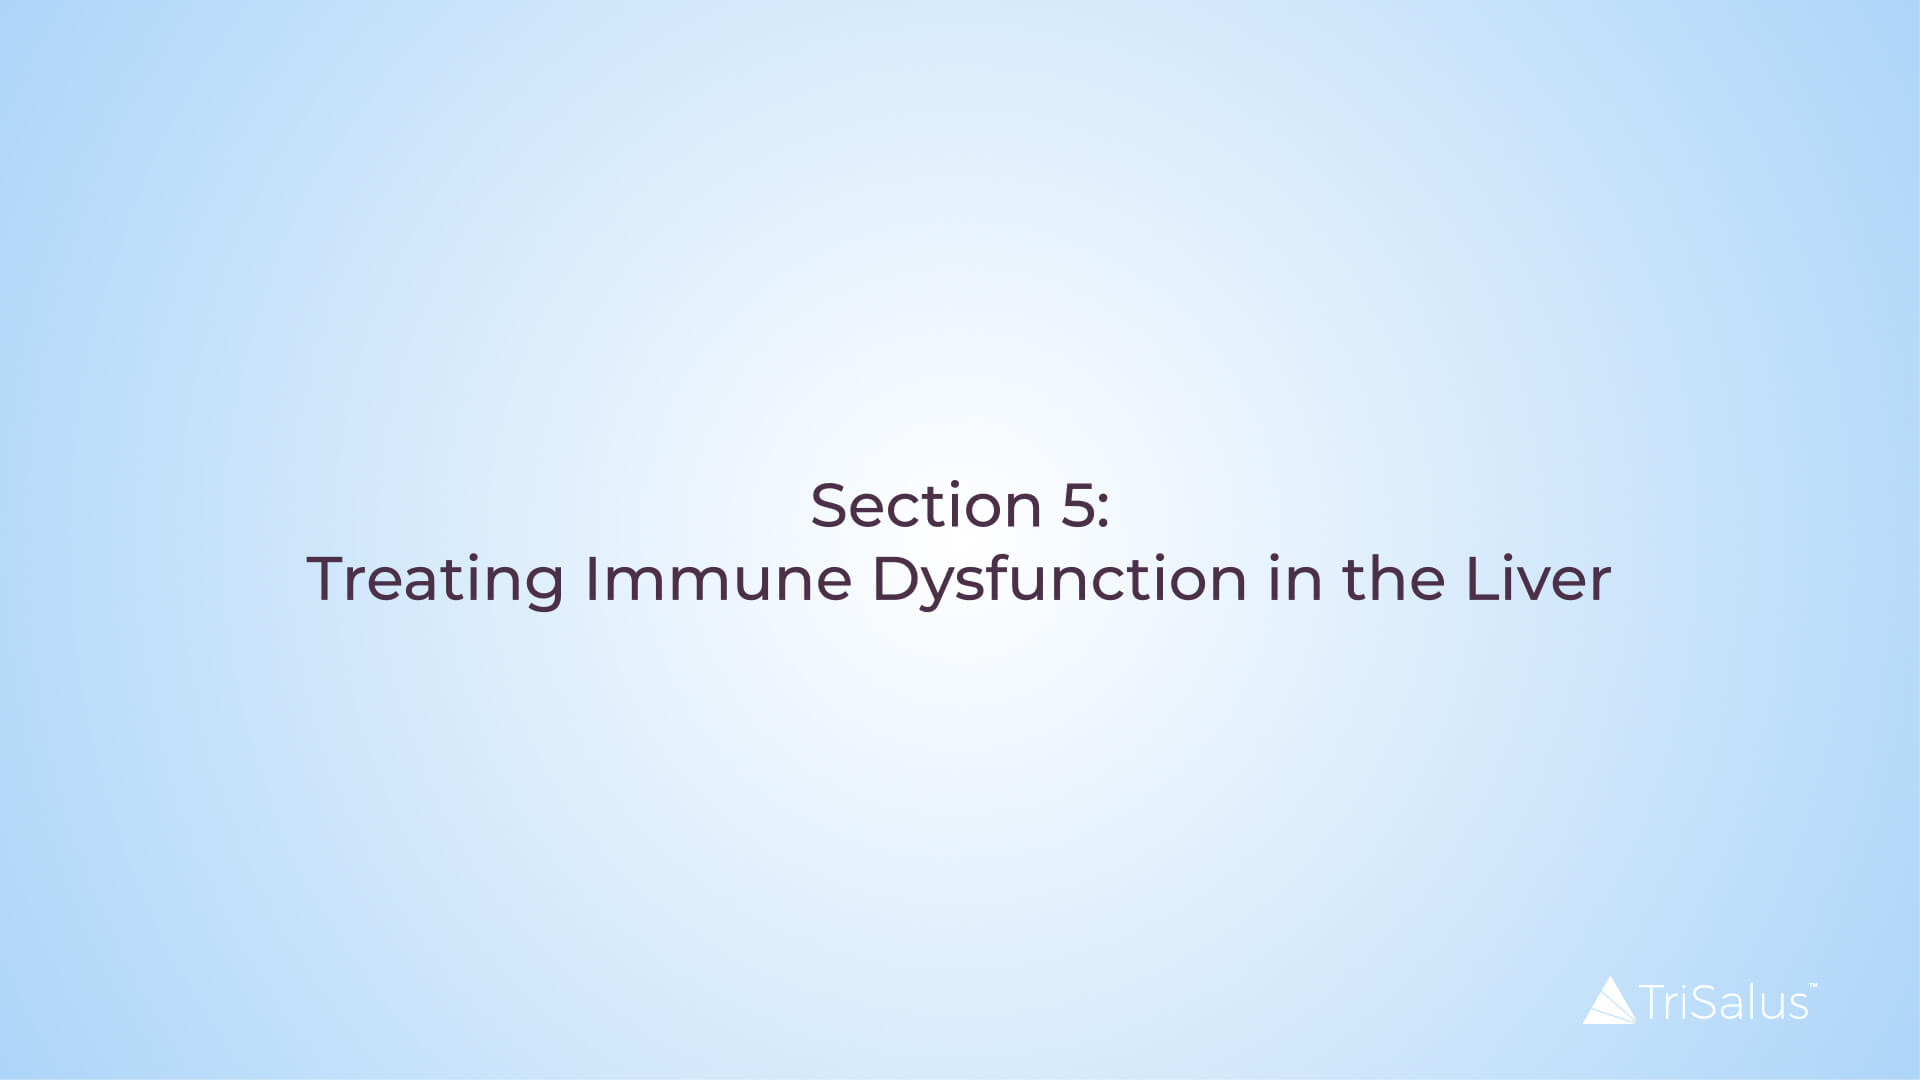 Video Thumbnail with text: Section 5: Treating Immune Dysfunction in the Liver